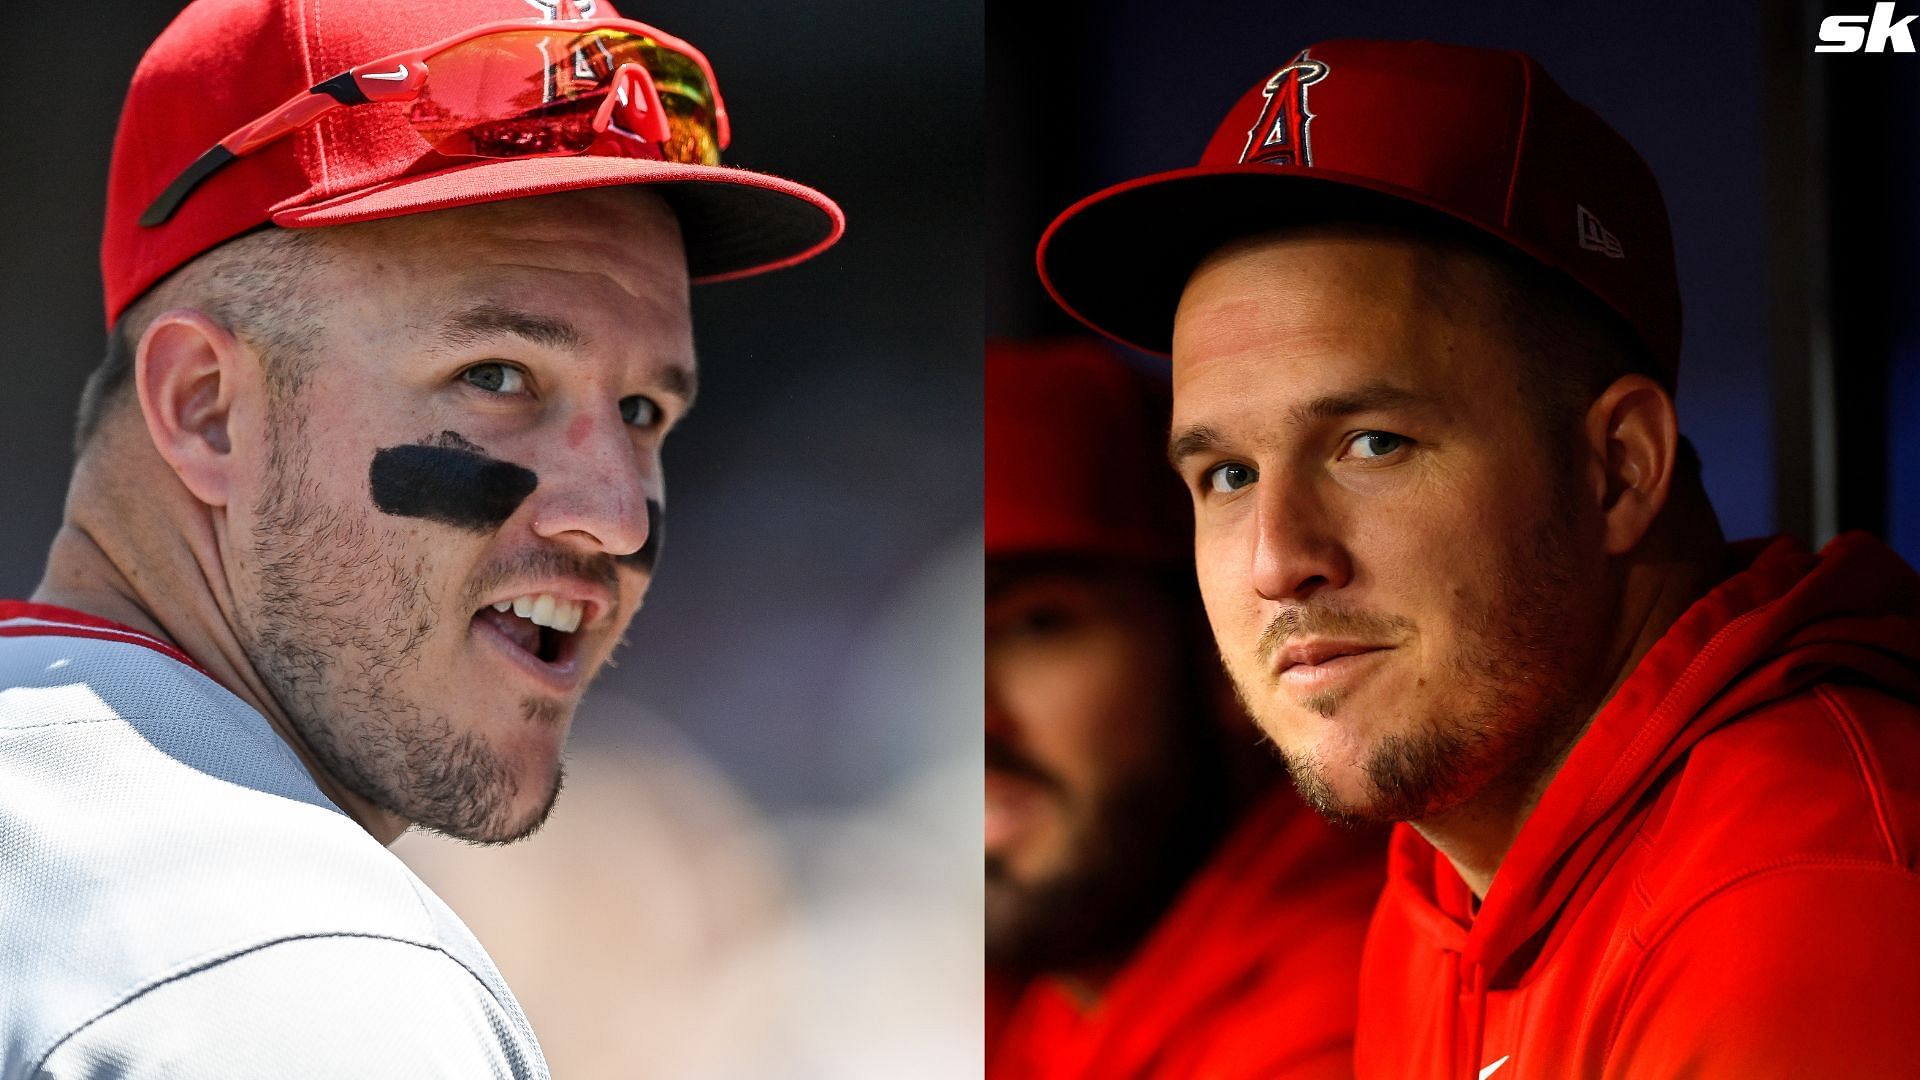 Mike Trout of the Los Angeles Angels looks on during a game against the Tampa Bay Rays at Tropicana Field